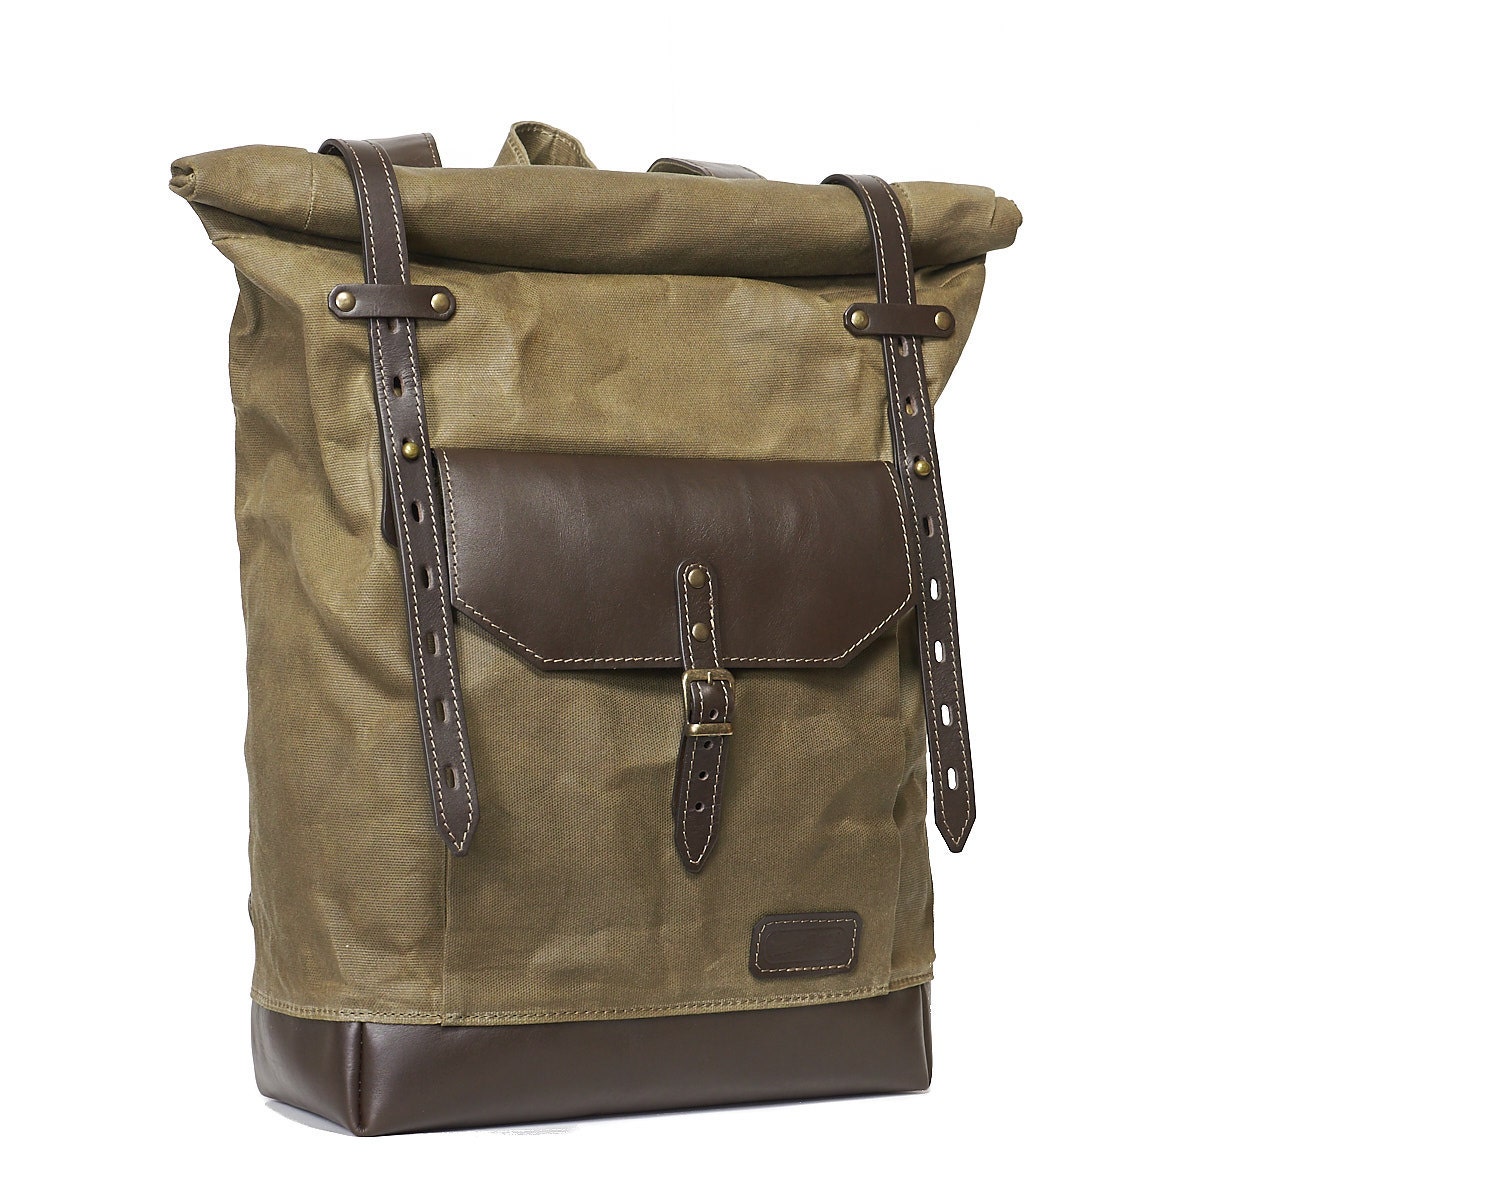 Olive green waxed canvas backpack. Waxed canvas by InnesBags